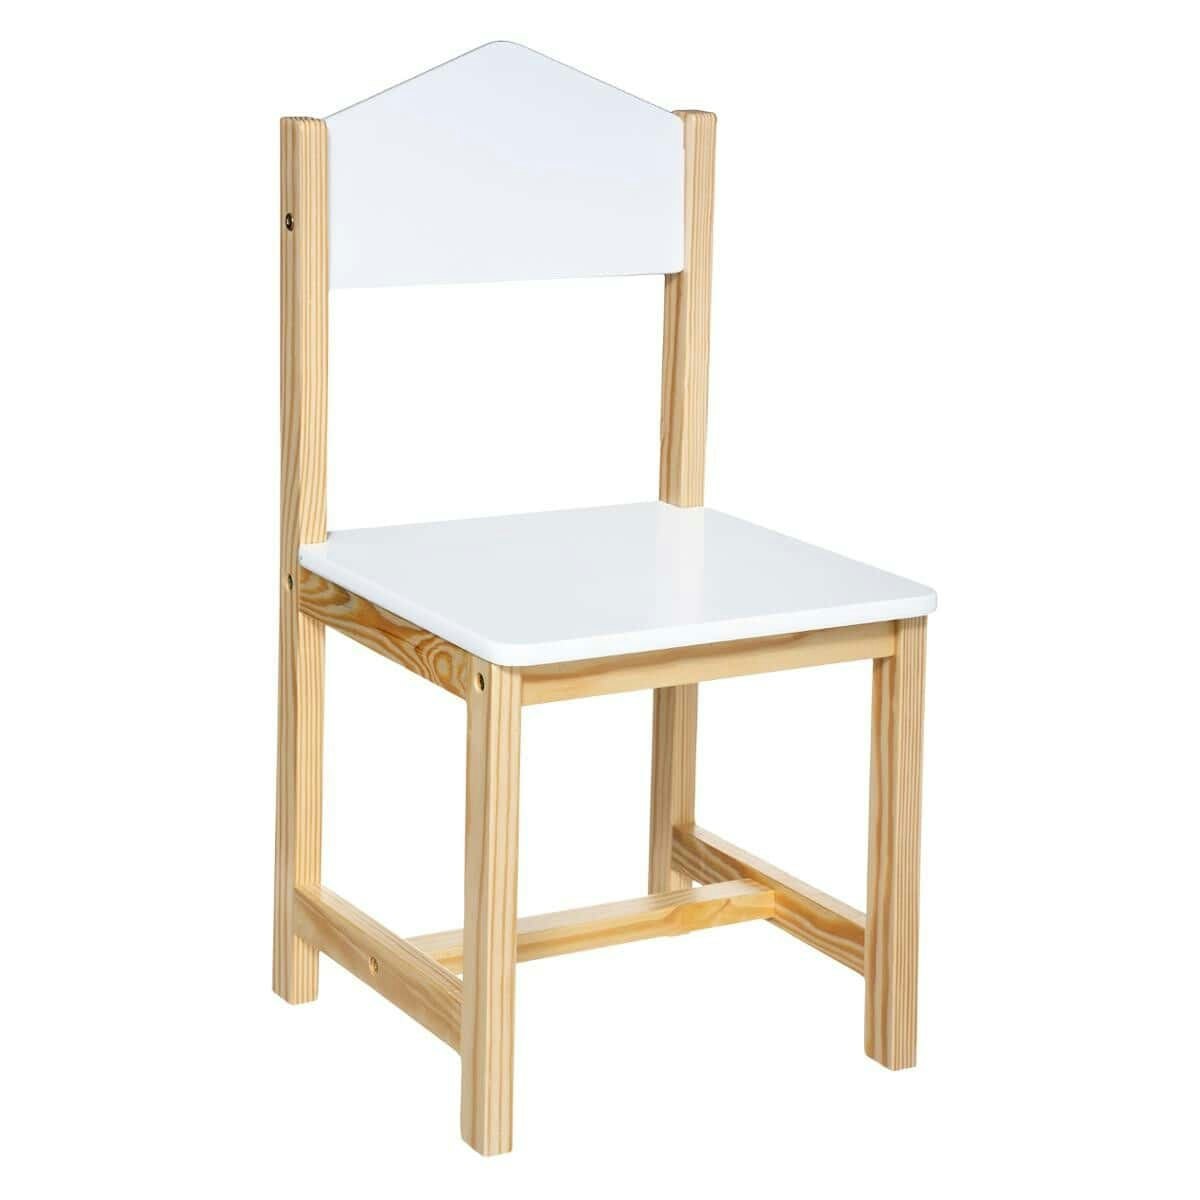 Wooden chair for the children's room, white / nature 